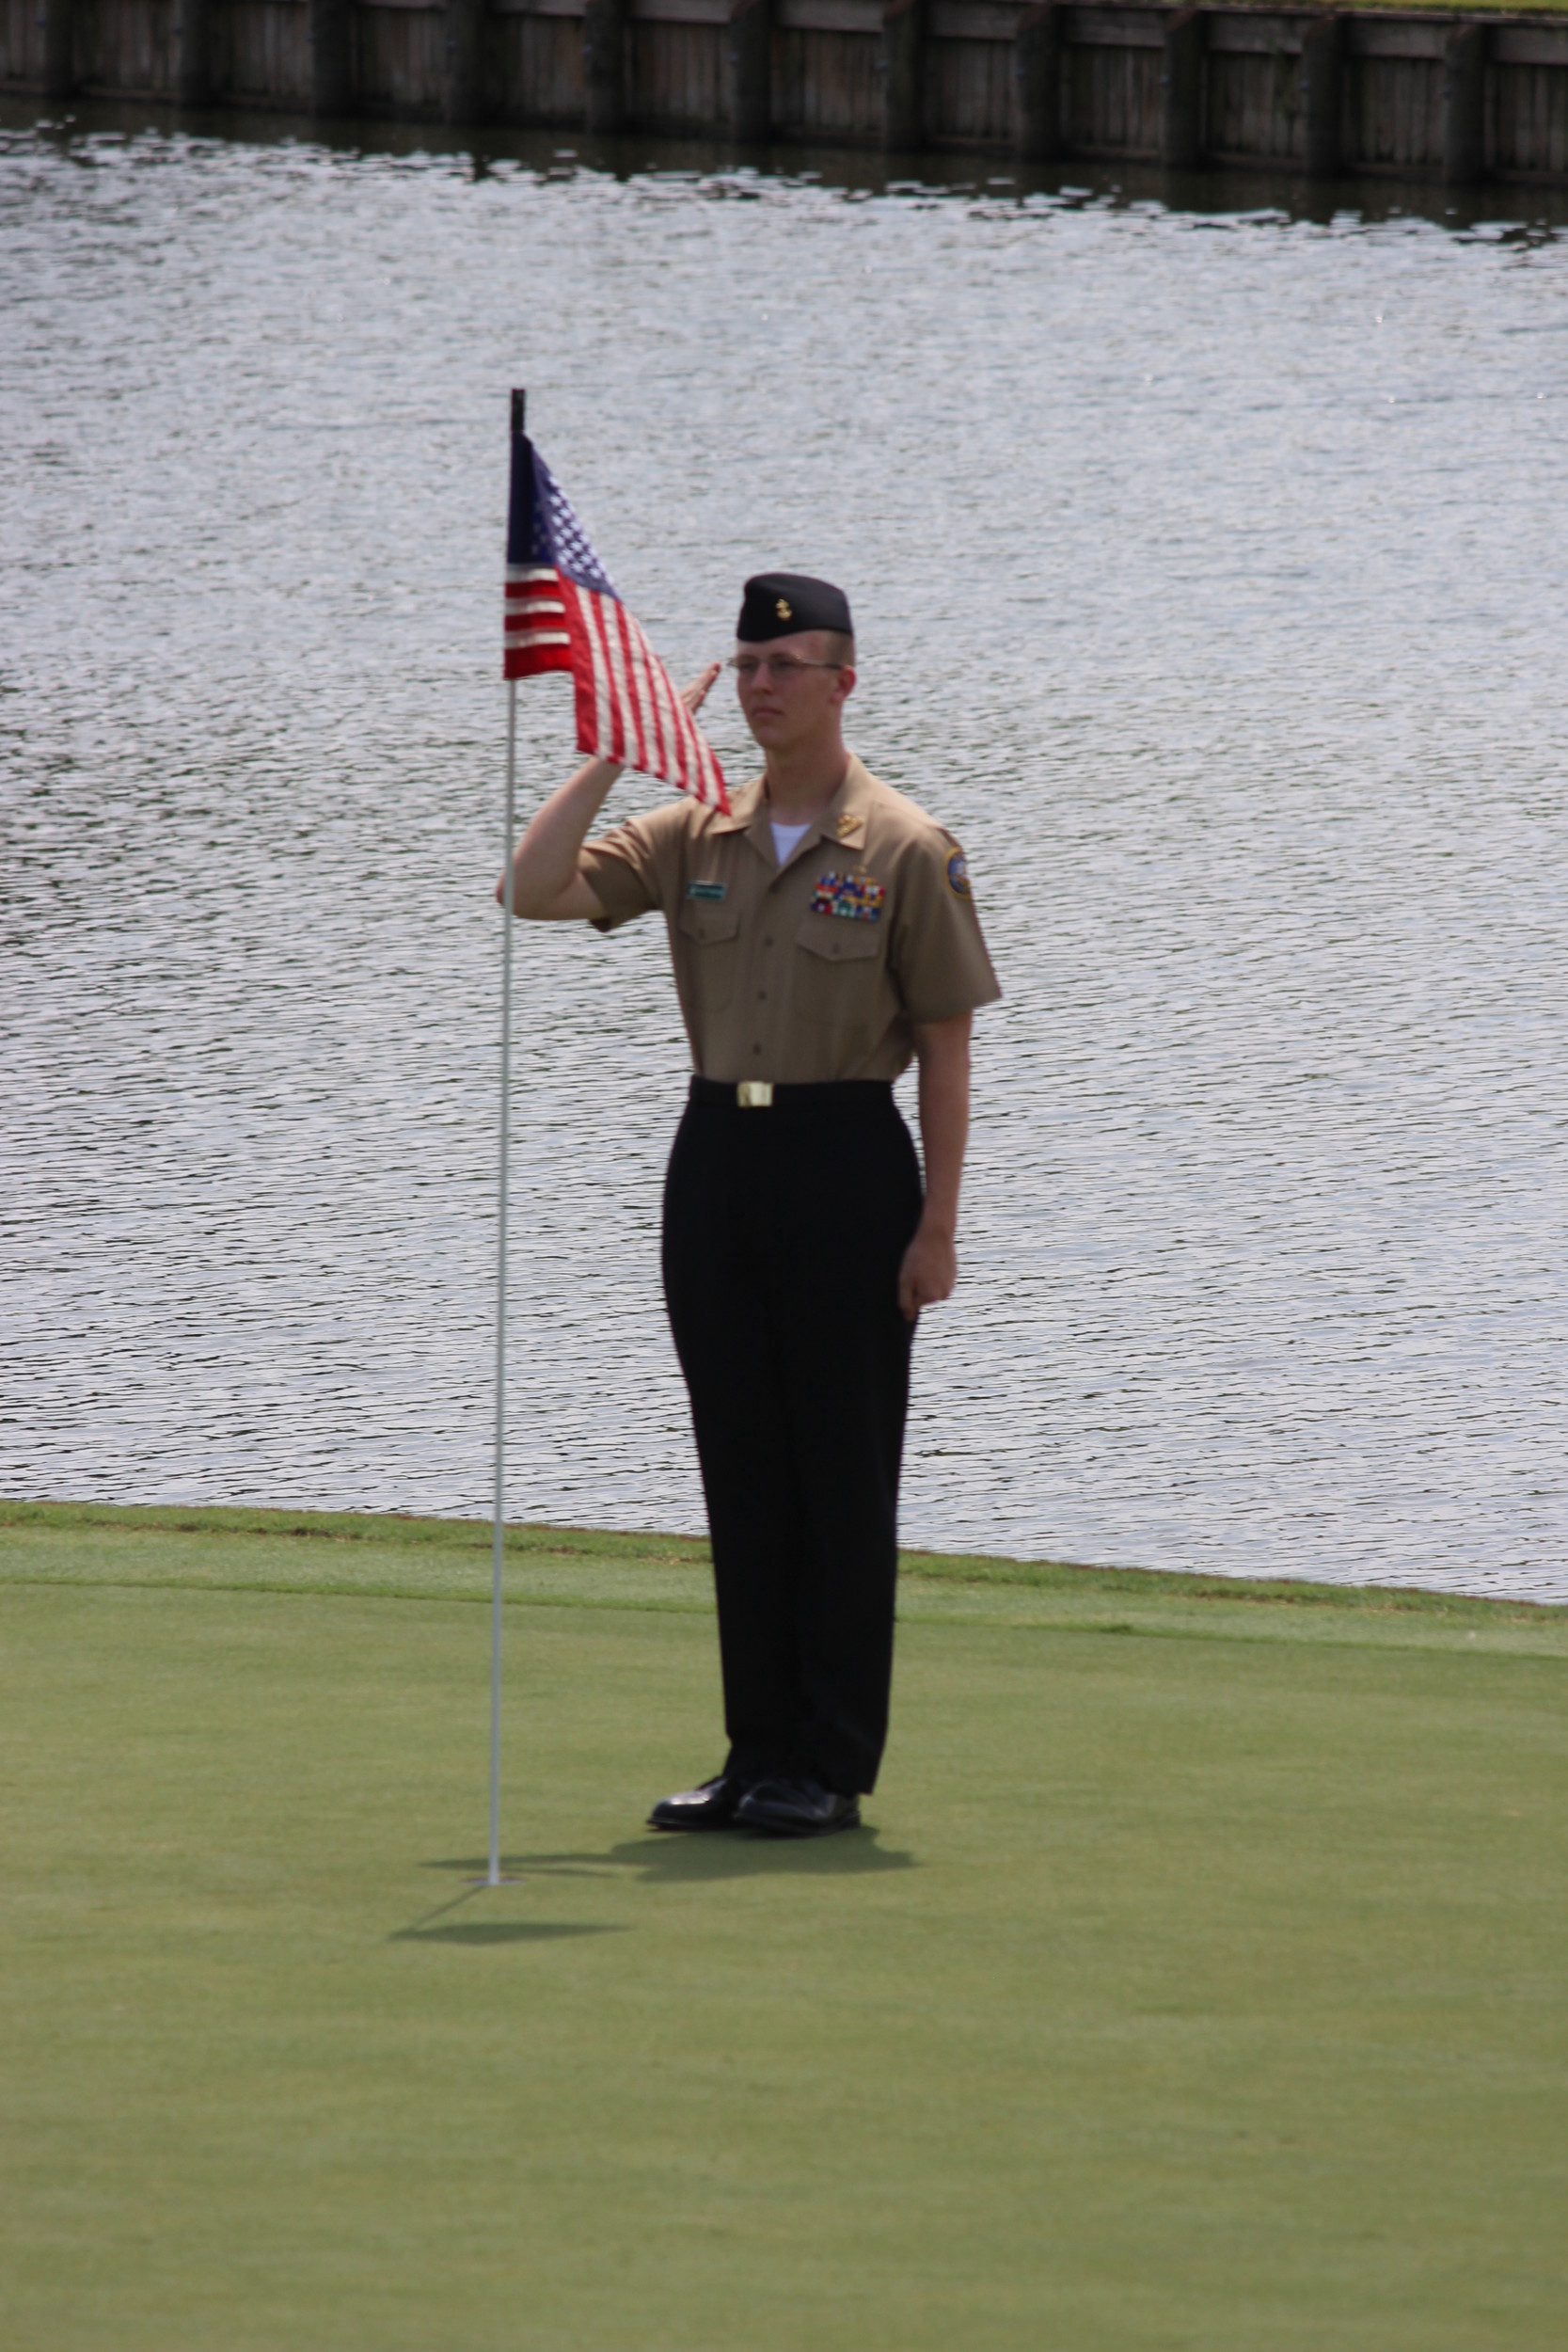 Cadet Konnor Matthews salutes the American flag on the 18th hole during the American Junior Golf Association tournament over Labor Day weekend.